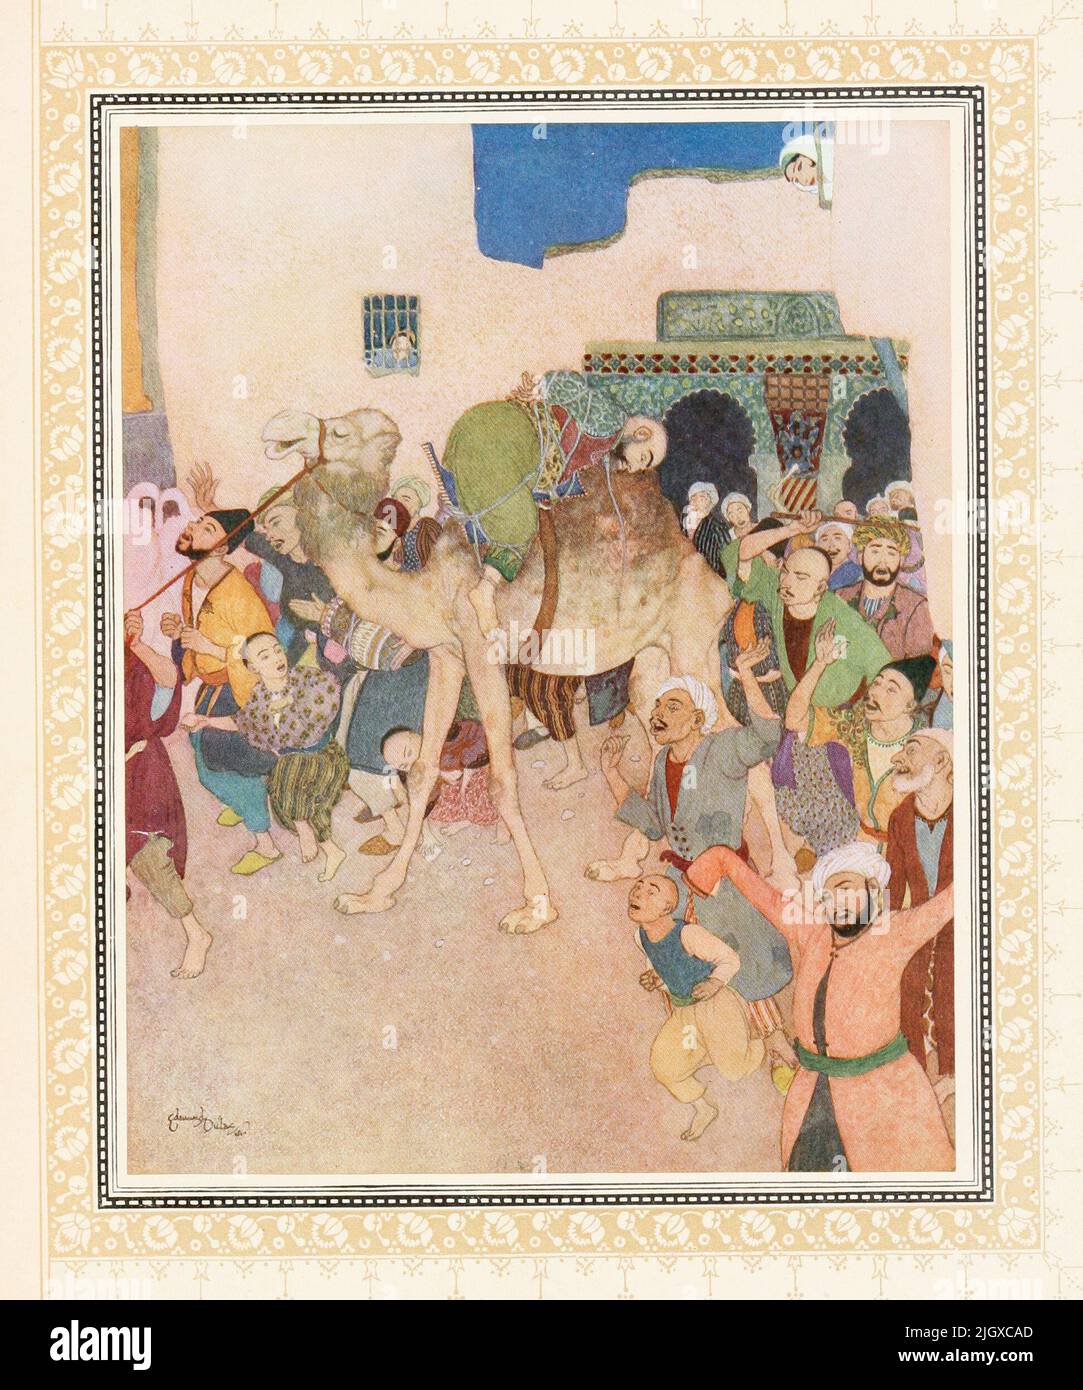 Abu-l-Hasan orders that the Sheiks of the district should be taken to be impaled on the back of a mangy camel. Illustration by Edmund Dulac for Sinbad the Sailor & Other Stories from the Arabian Nights (1914) Stock Photo